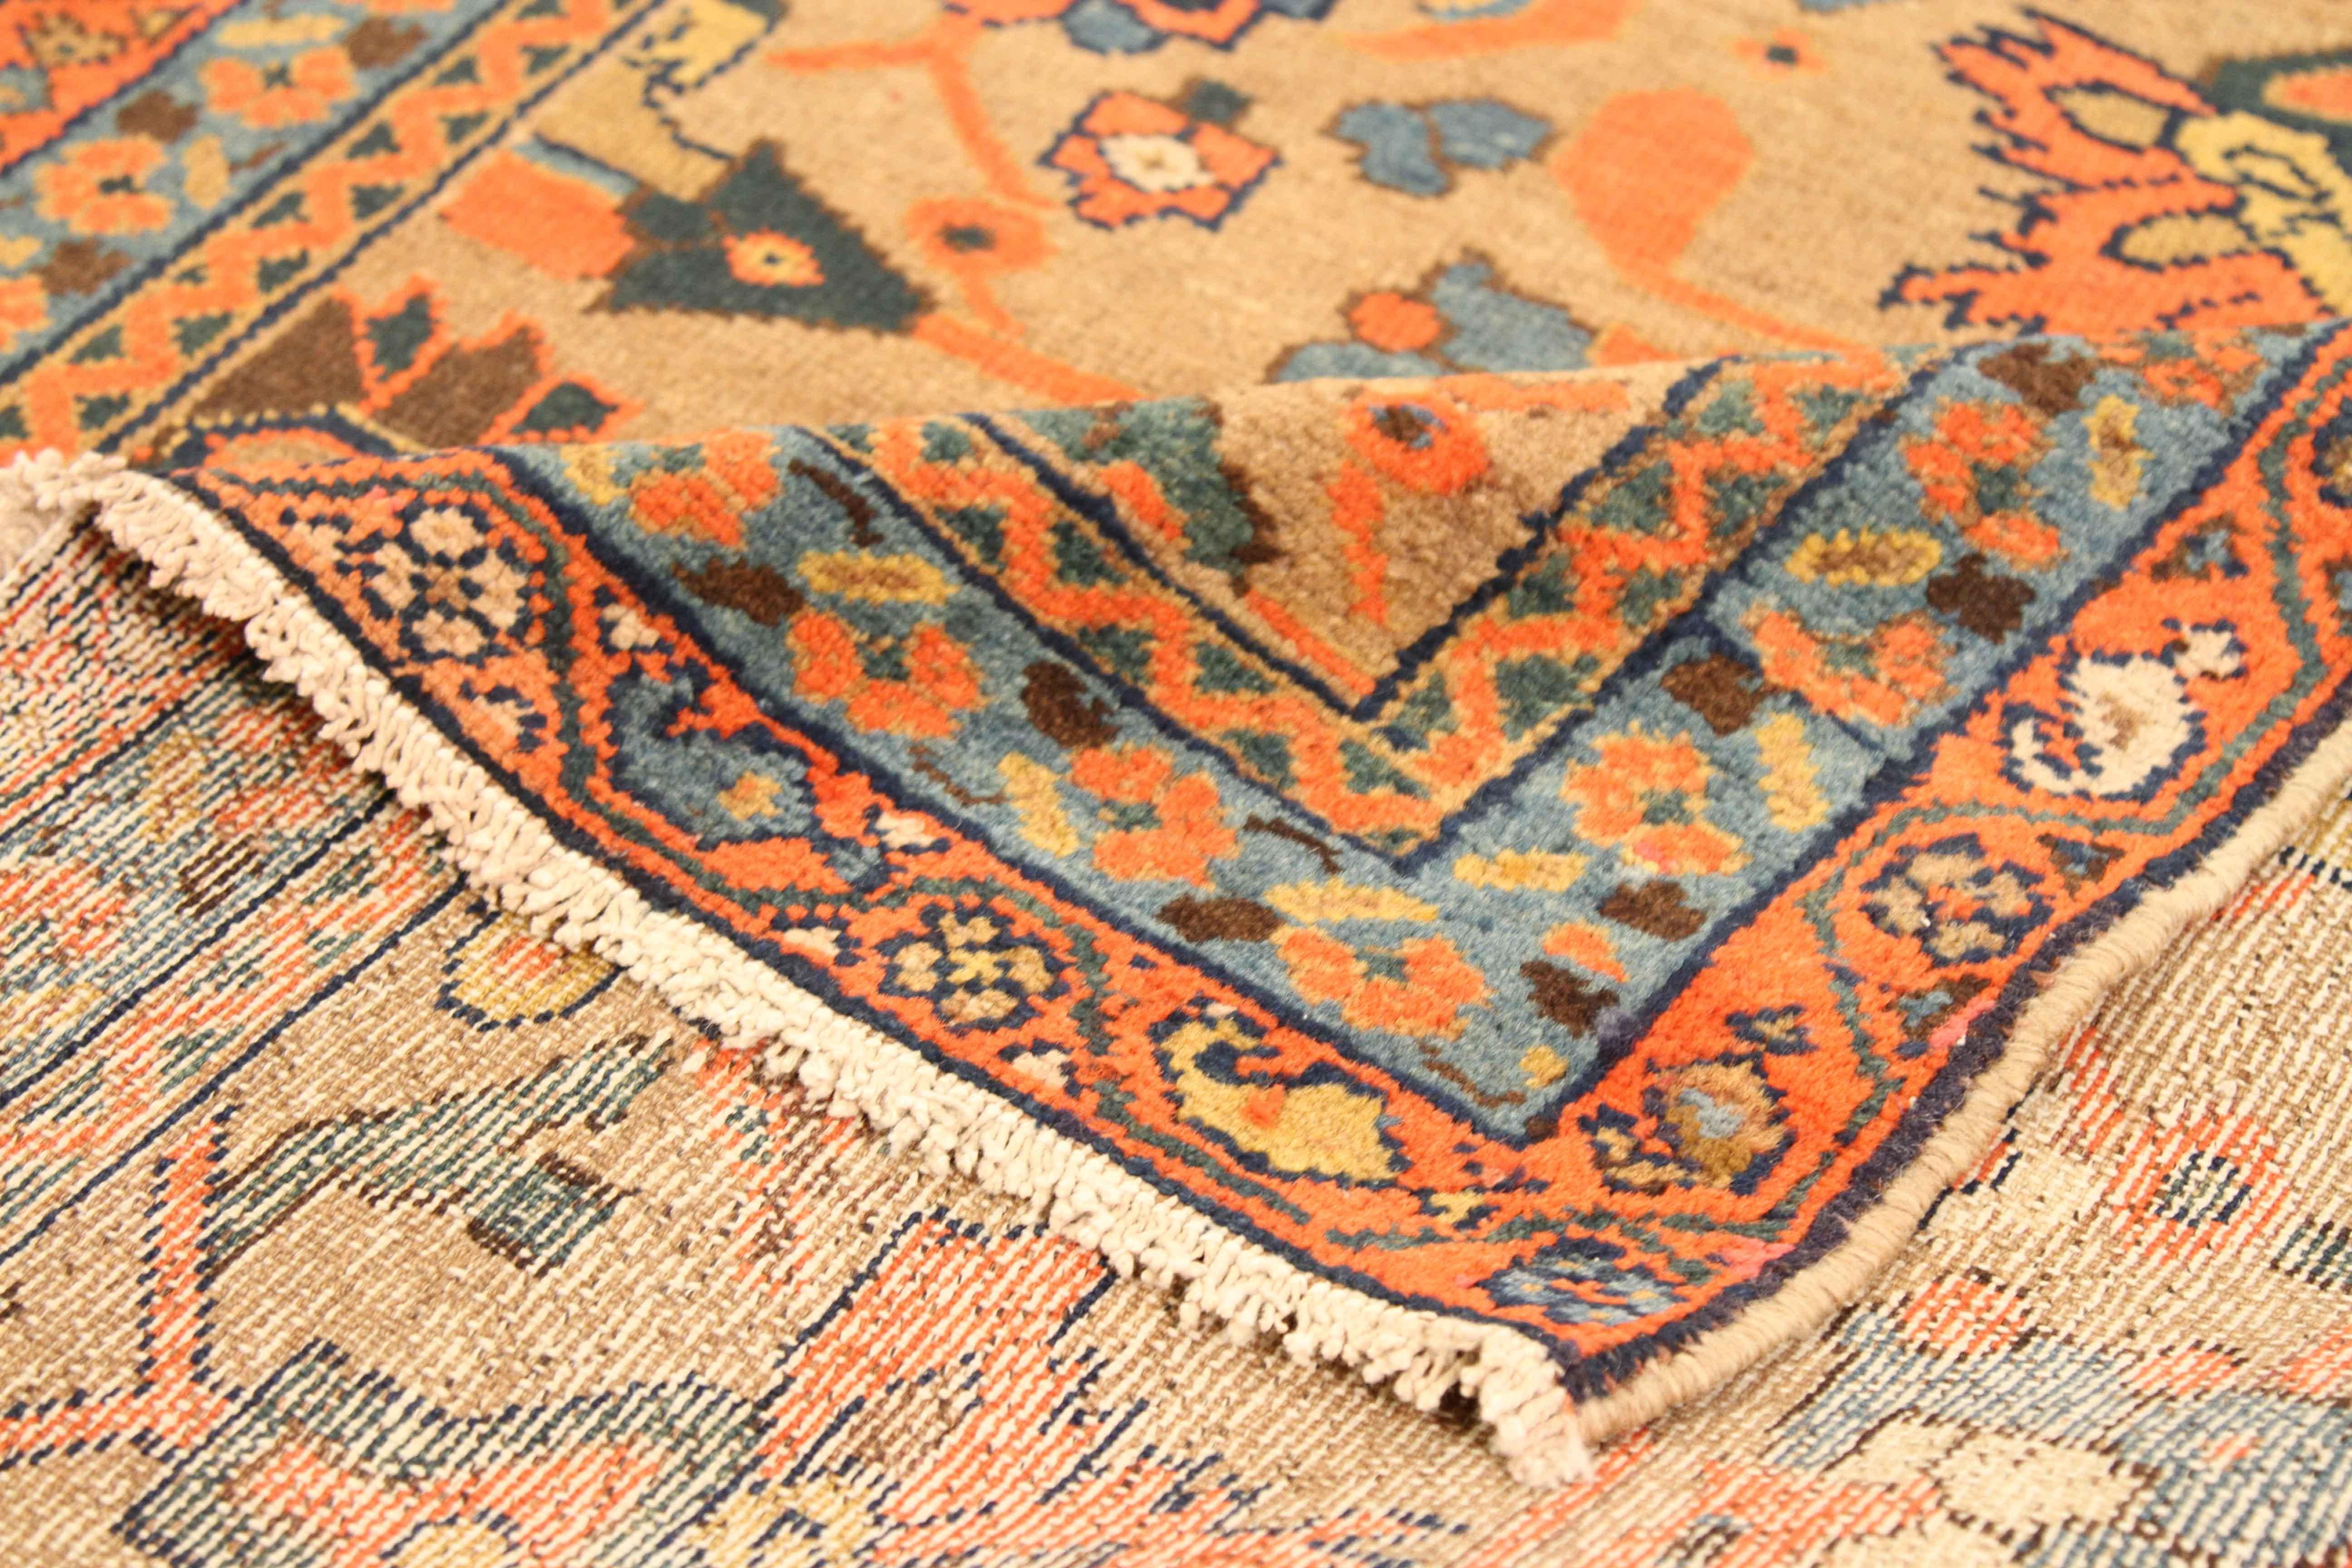 Handcrafted by hand in the 1920s, this fine wool antique Persian rug features a striking ‘field of flowers’ theme that is made even more magnificent with its chosen color palette of brown, orange, red, beige, and yellow. The details also shine